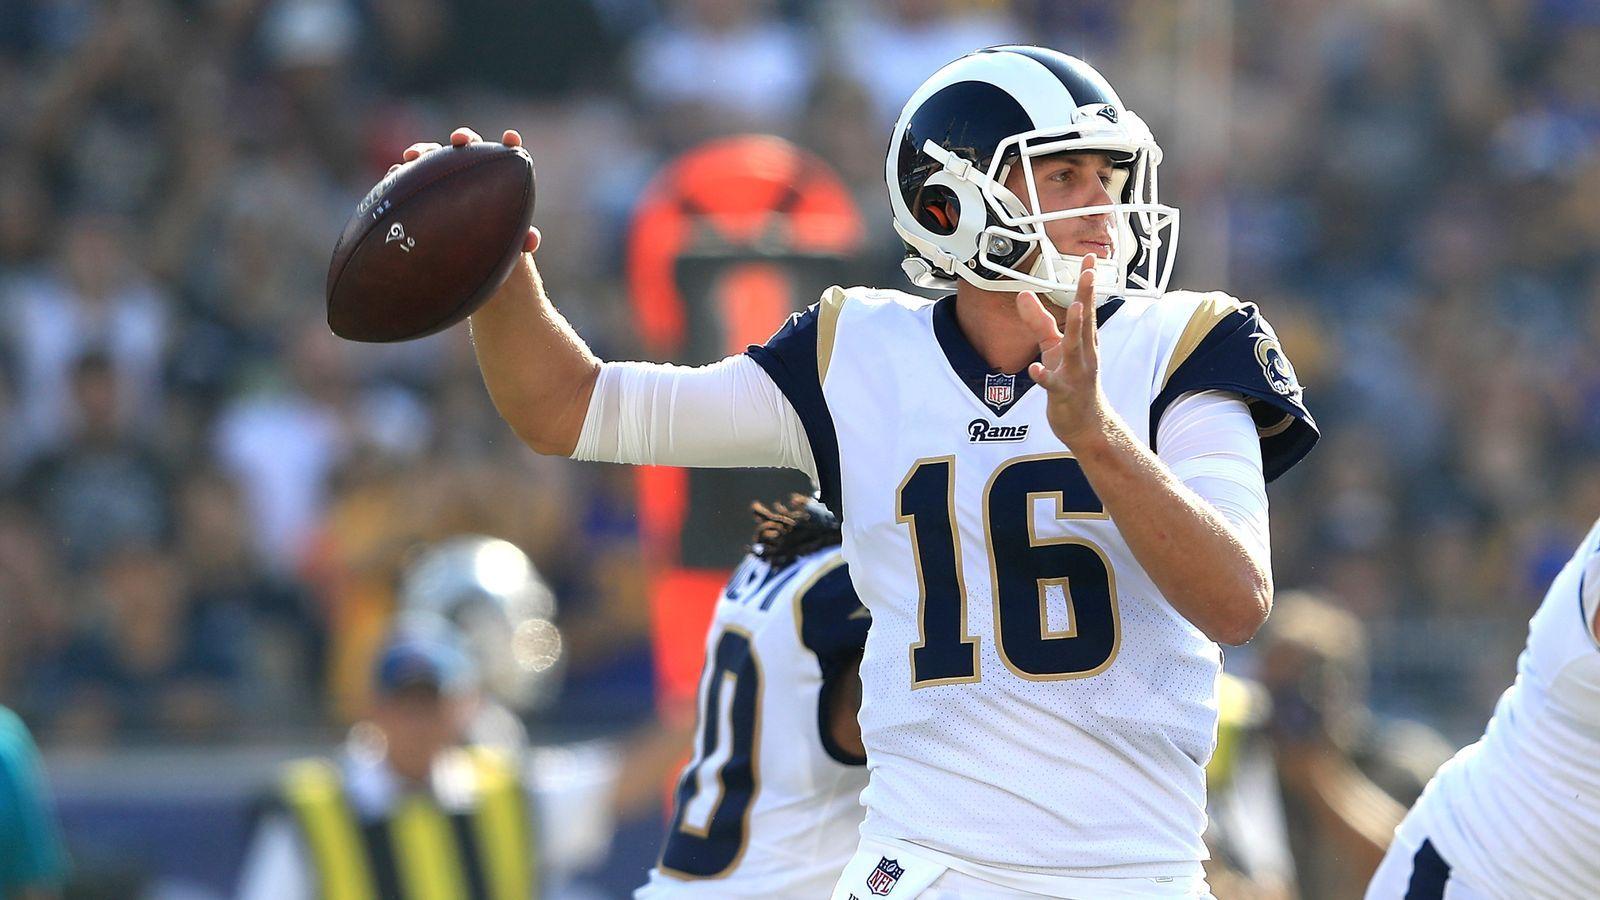 New Orleans Saints 20 26 Los Angeles Rams: Jared Goff Stars In NFC